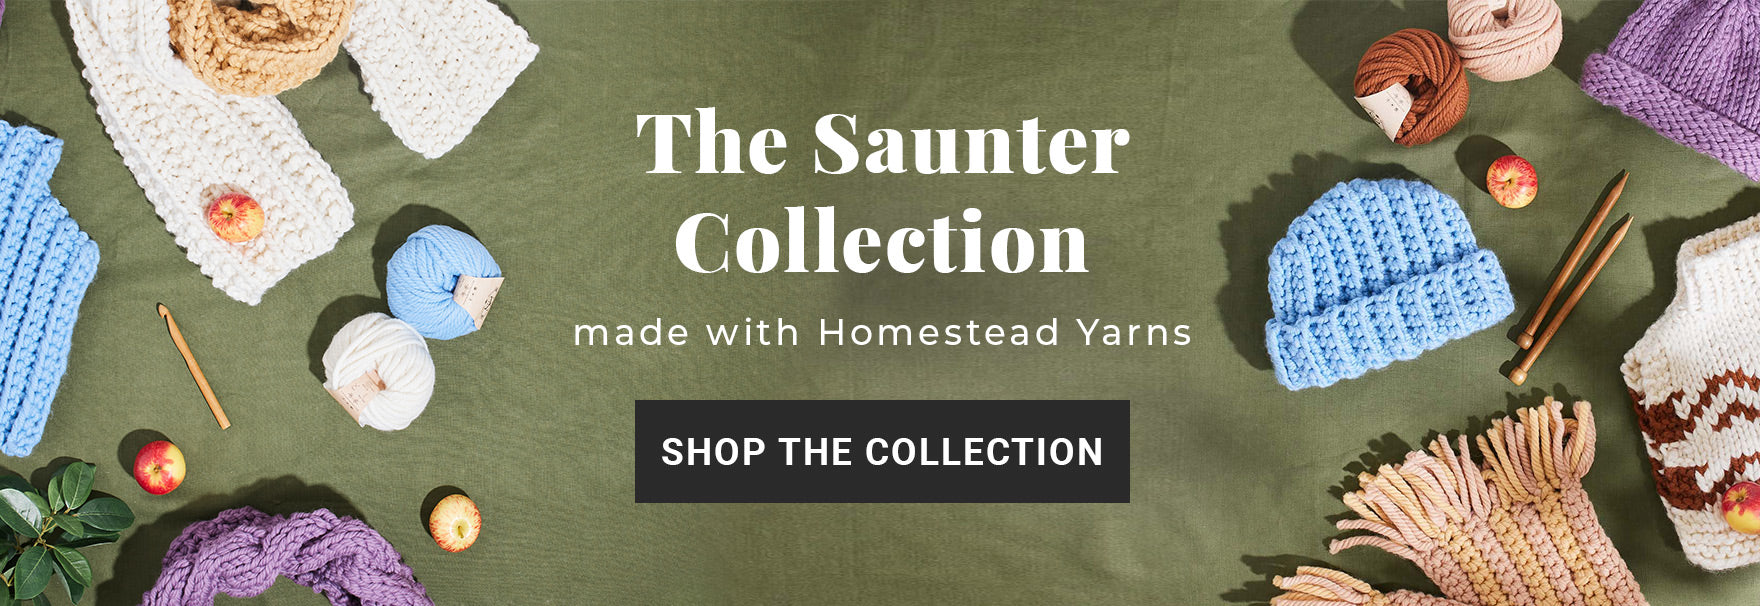 Shop the Saunter Collection free knitting and crochet patterns